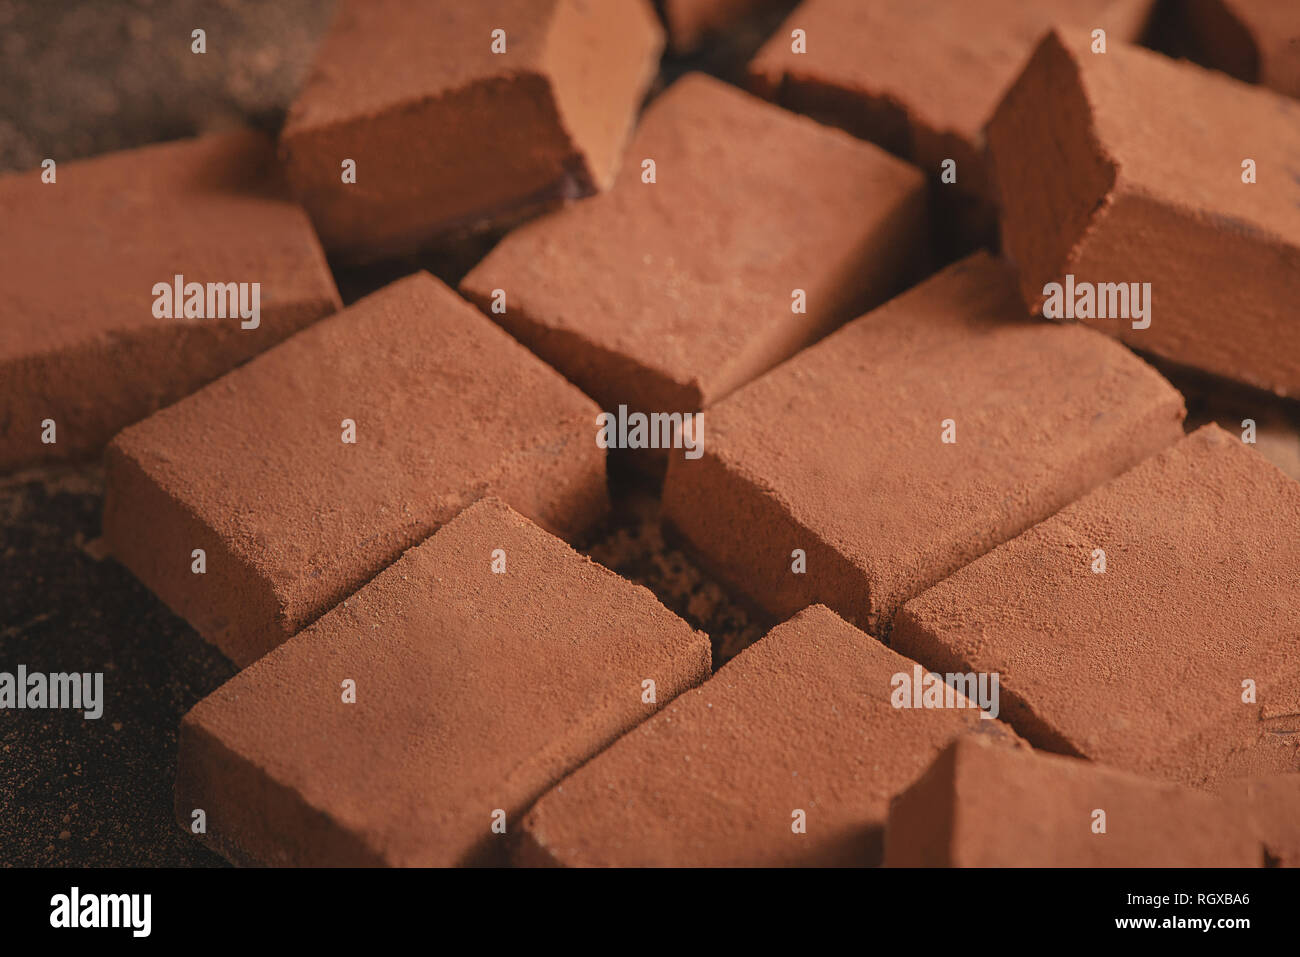 Cocoa powder texture close-up. Soft chocolates on a black background with copy space. Stock Photo